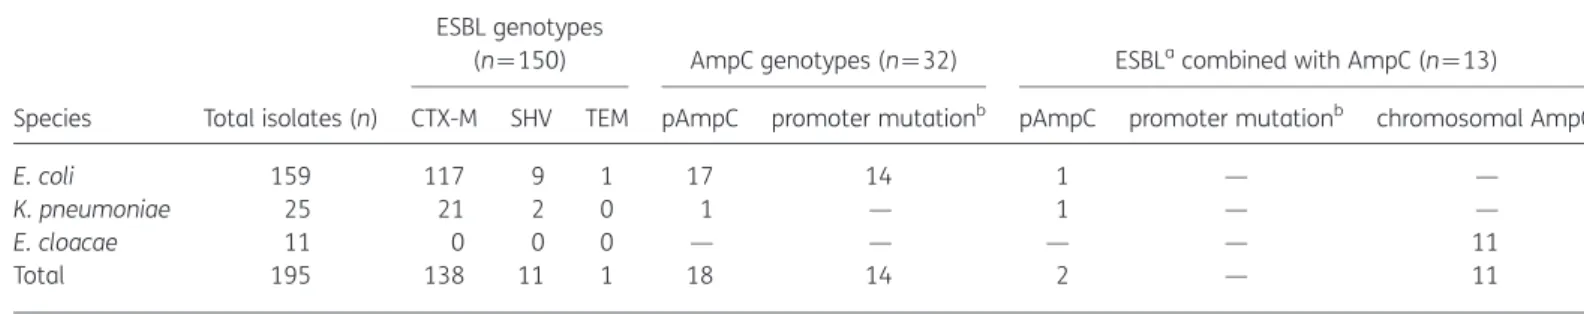 Table 1. ESBL and/or AmpC genotypes of the Enterobacteriaceae isolates included in the study